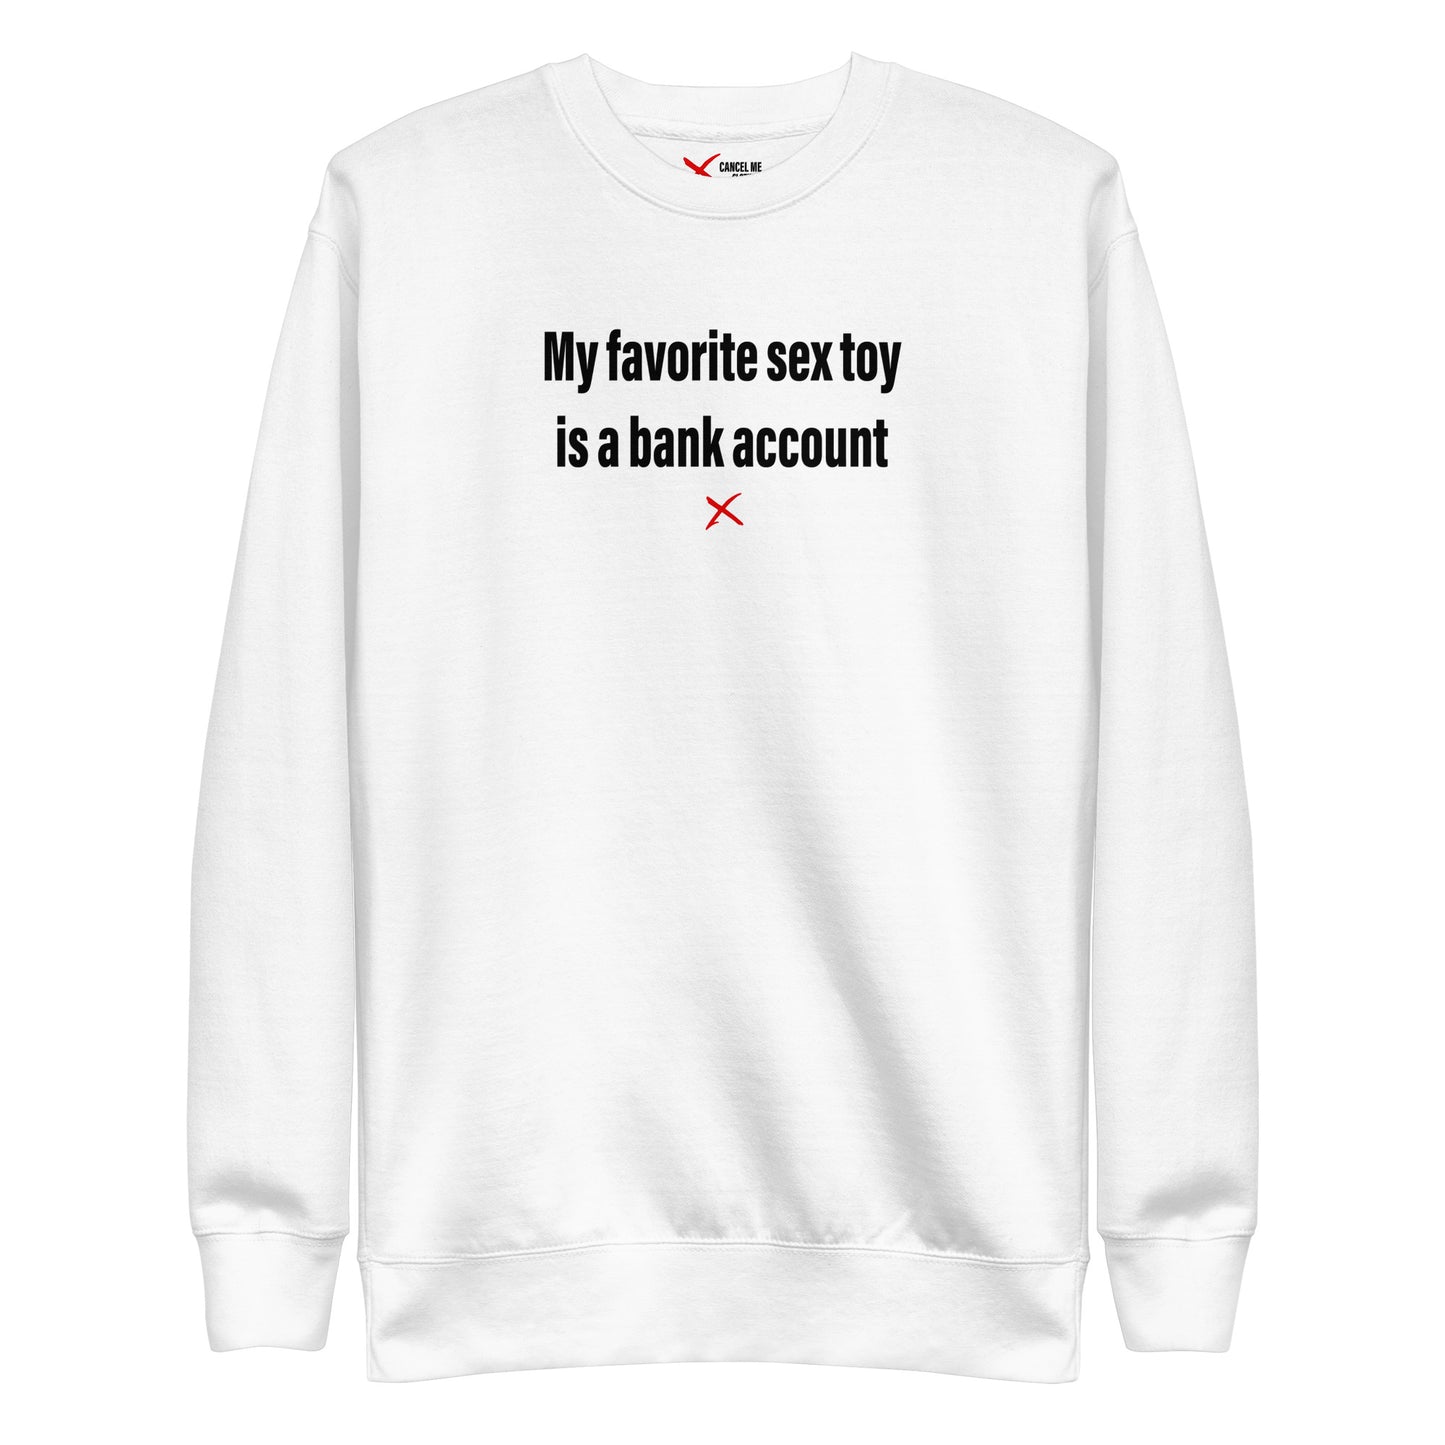 My favorite sex toy is a bank account - Sweatshirt